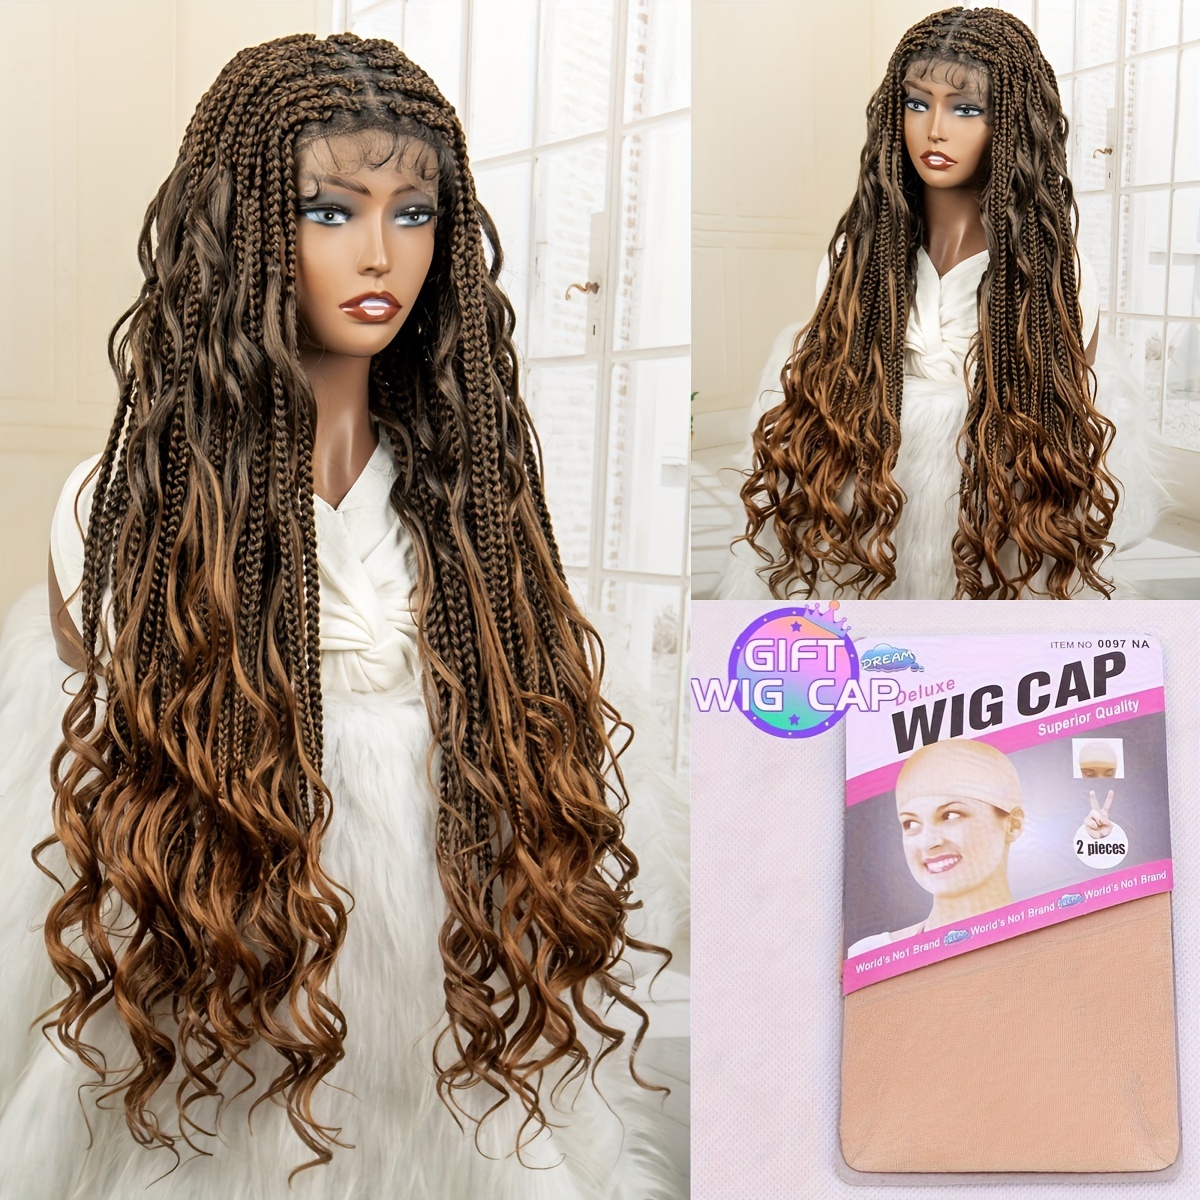 FULL LACE French curls Ombre black & brown Knottless box